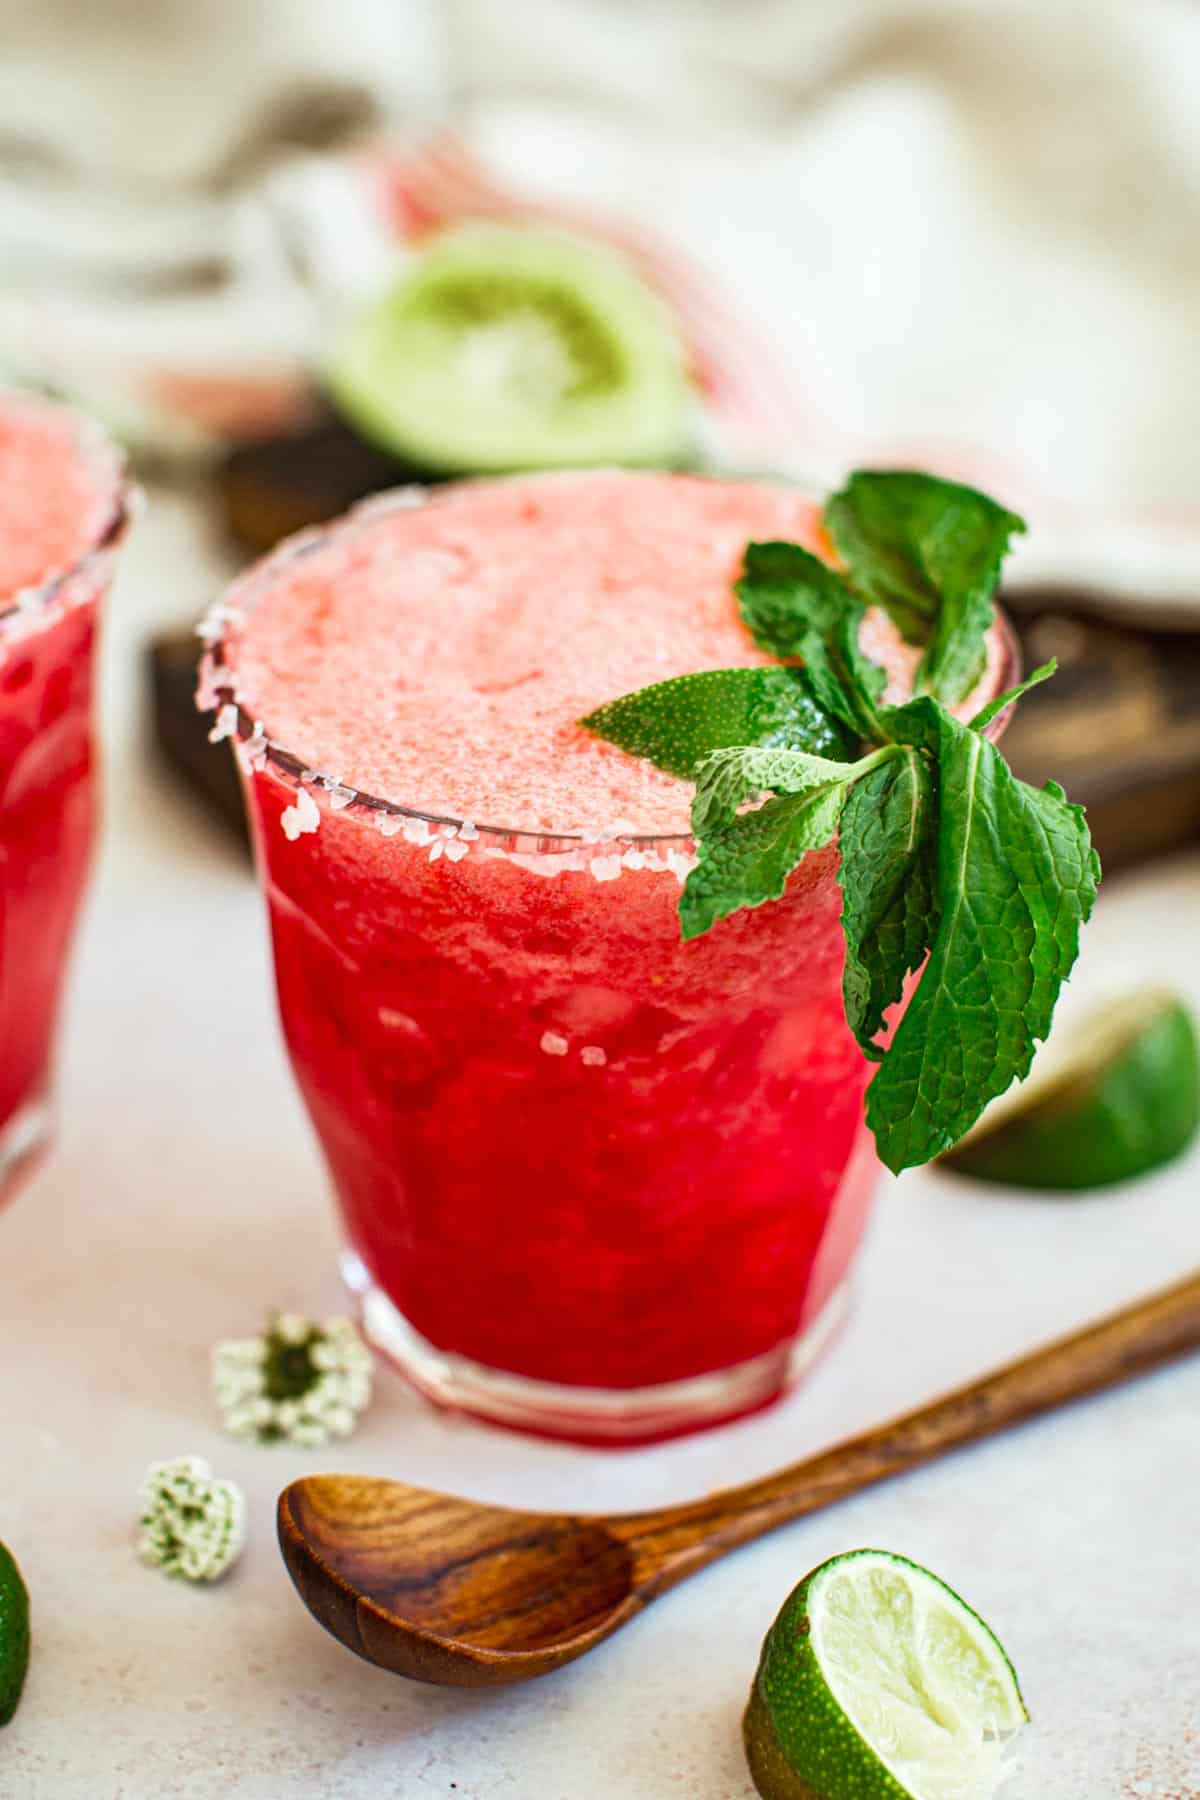 Raspberry margarita with a salted rim and mint leaves for garnish.